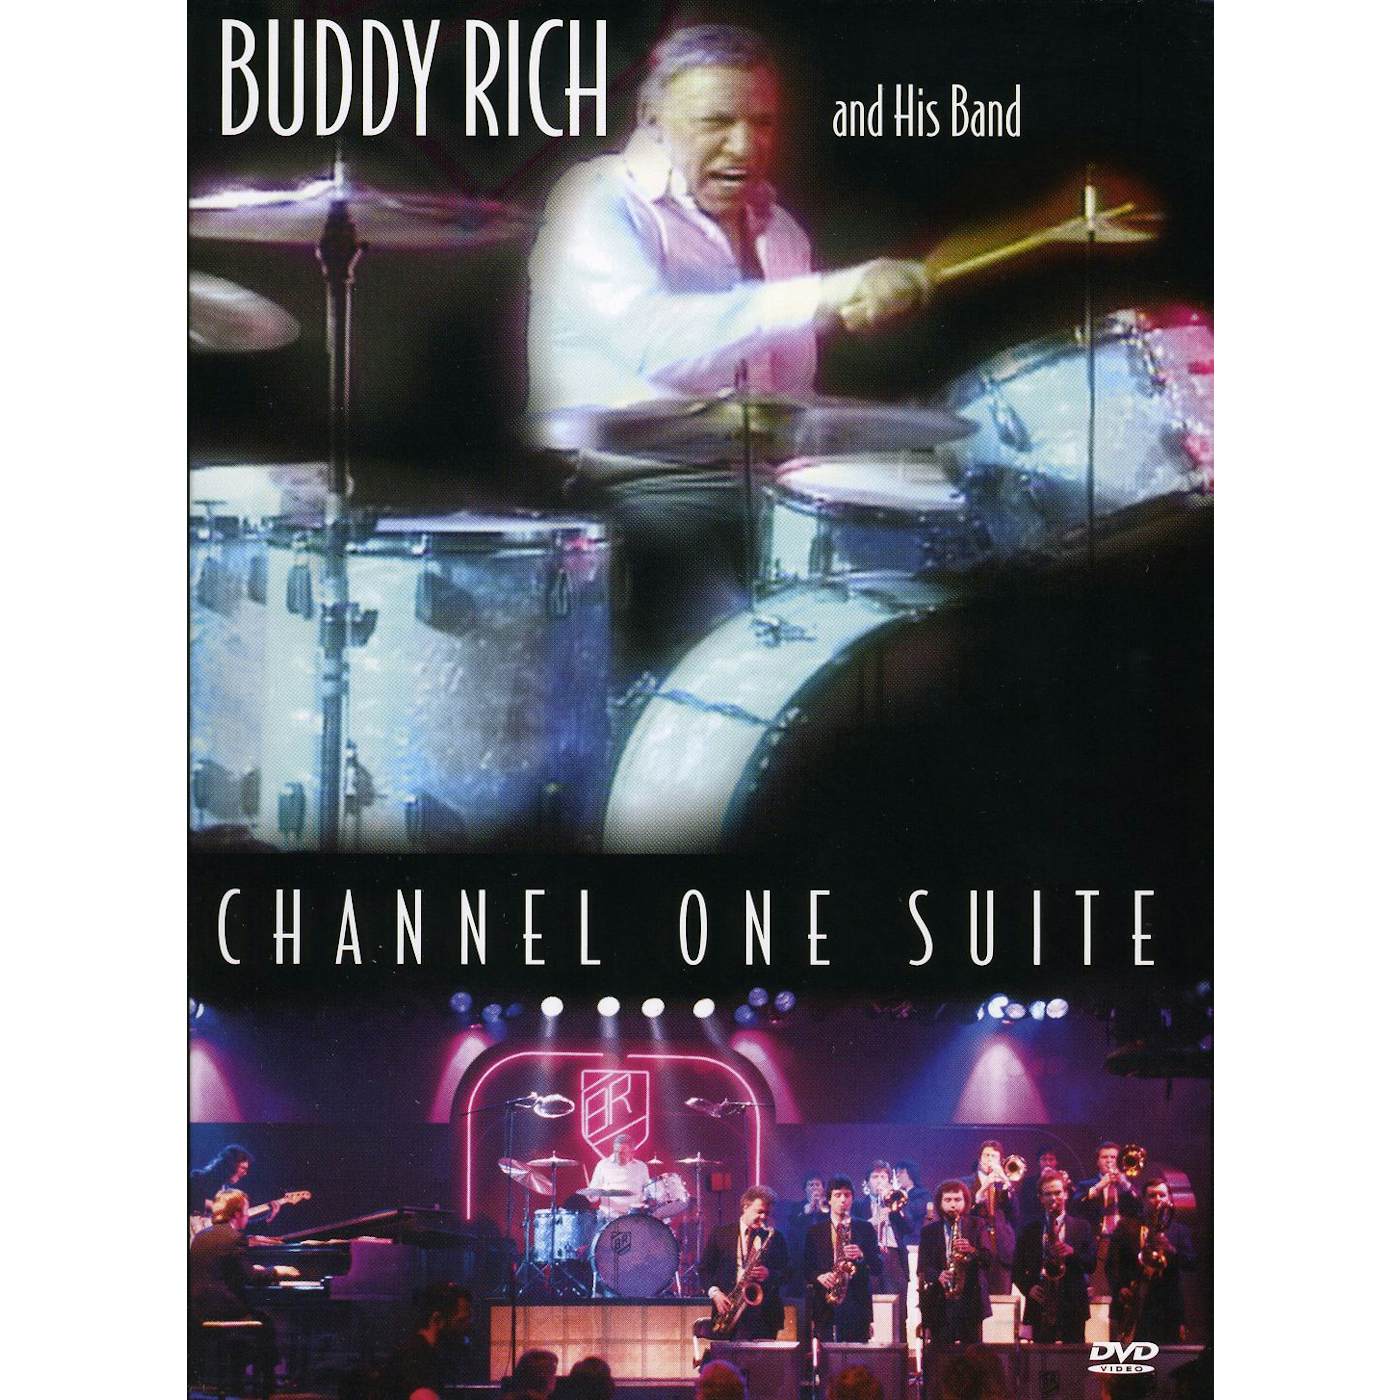 Buddy Rich CHANNEL ONE SUITE DVD